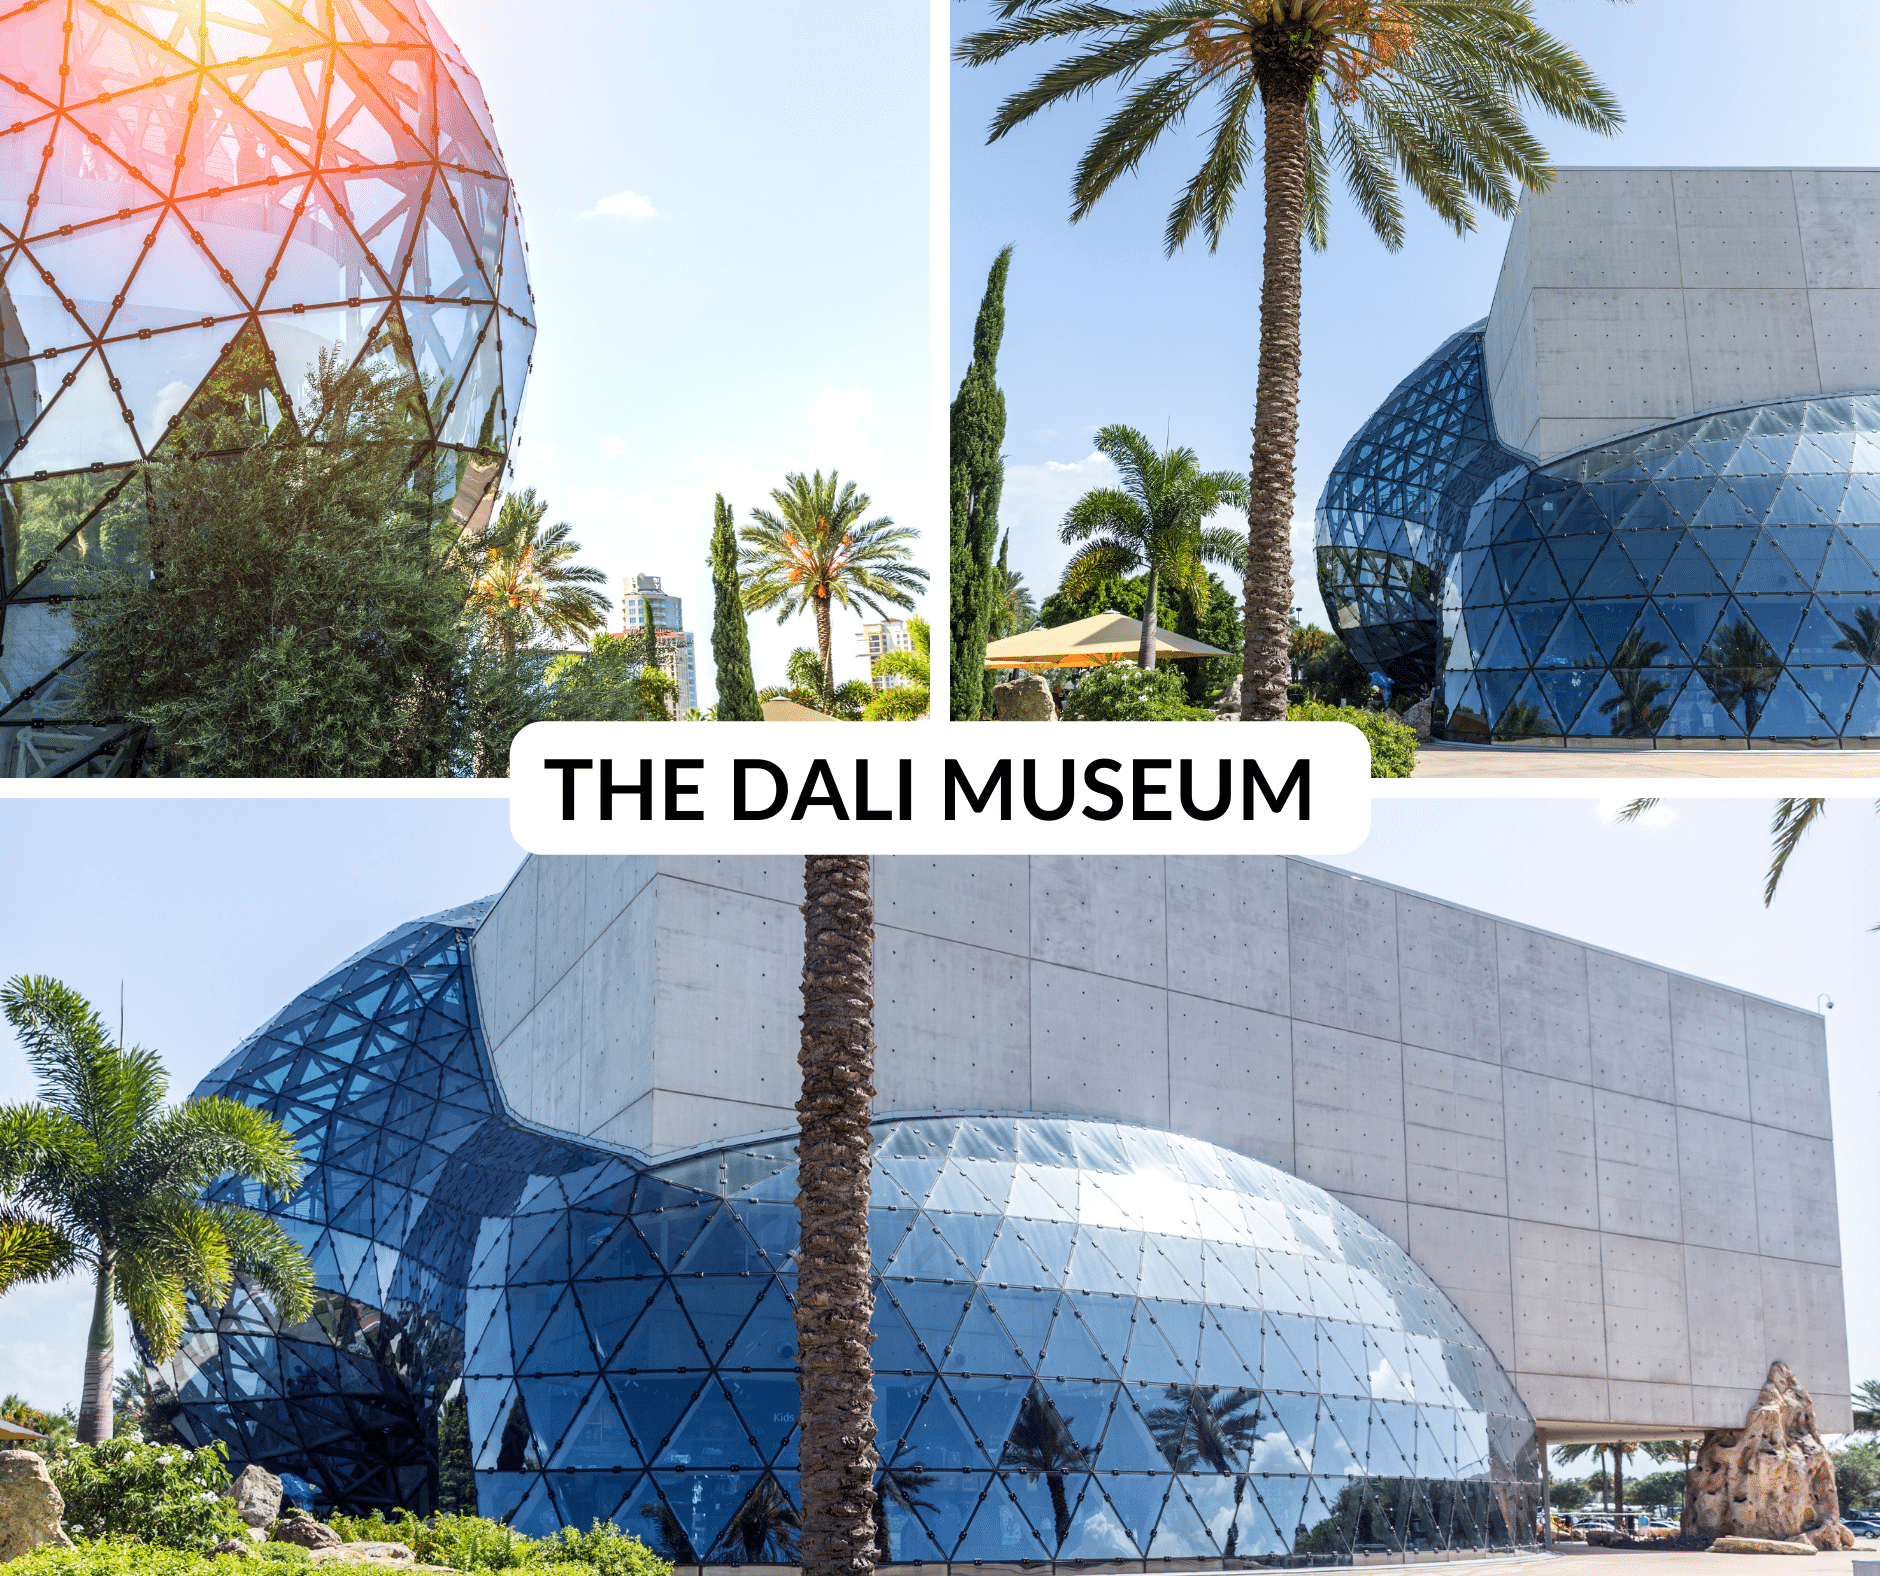 Photo collage of the Dali Museum building in St. pete